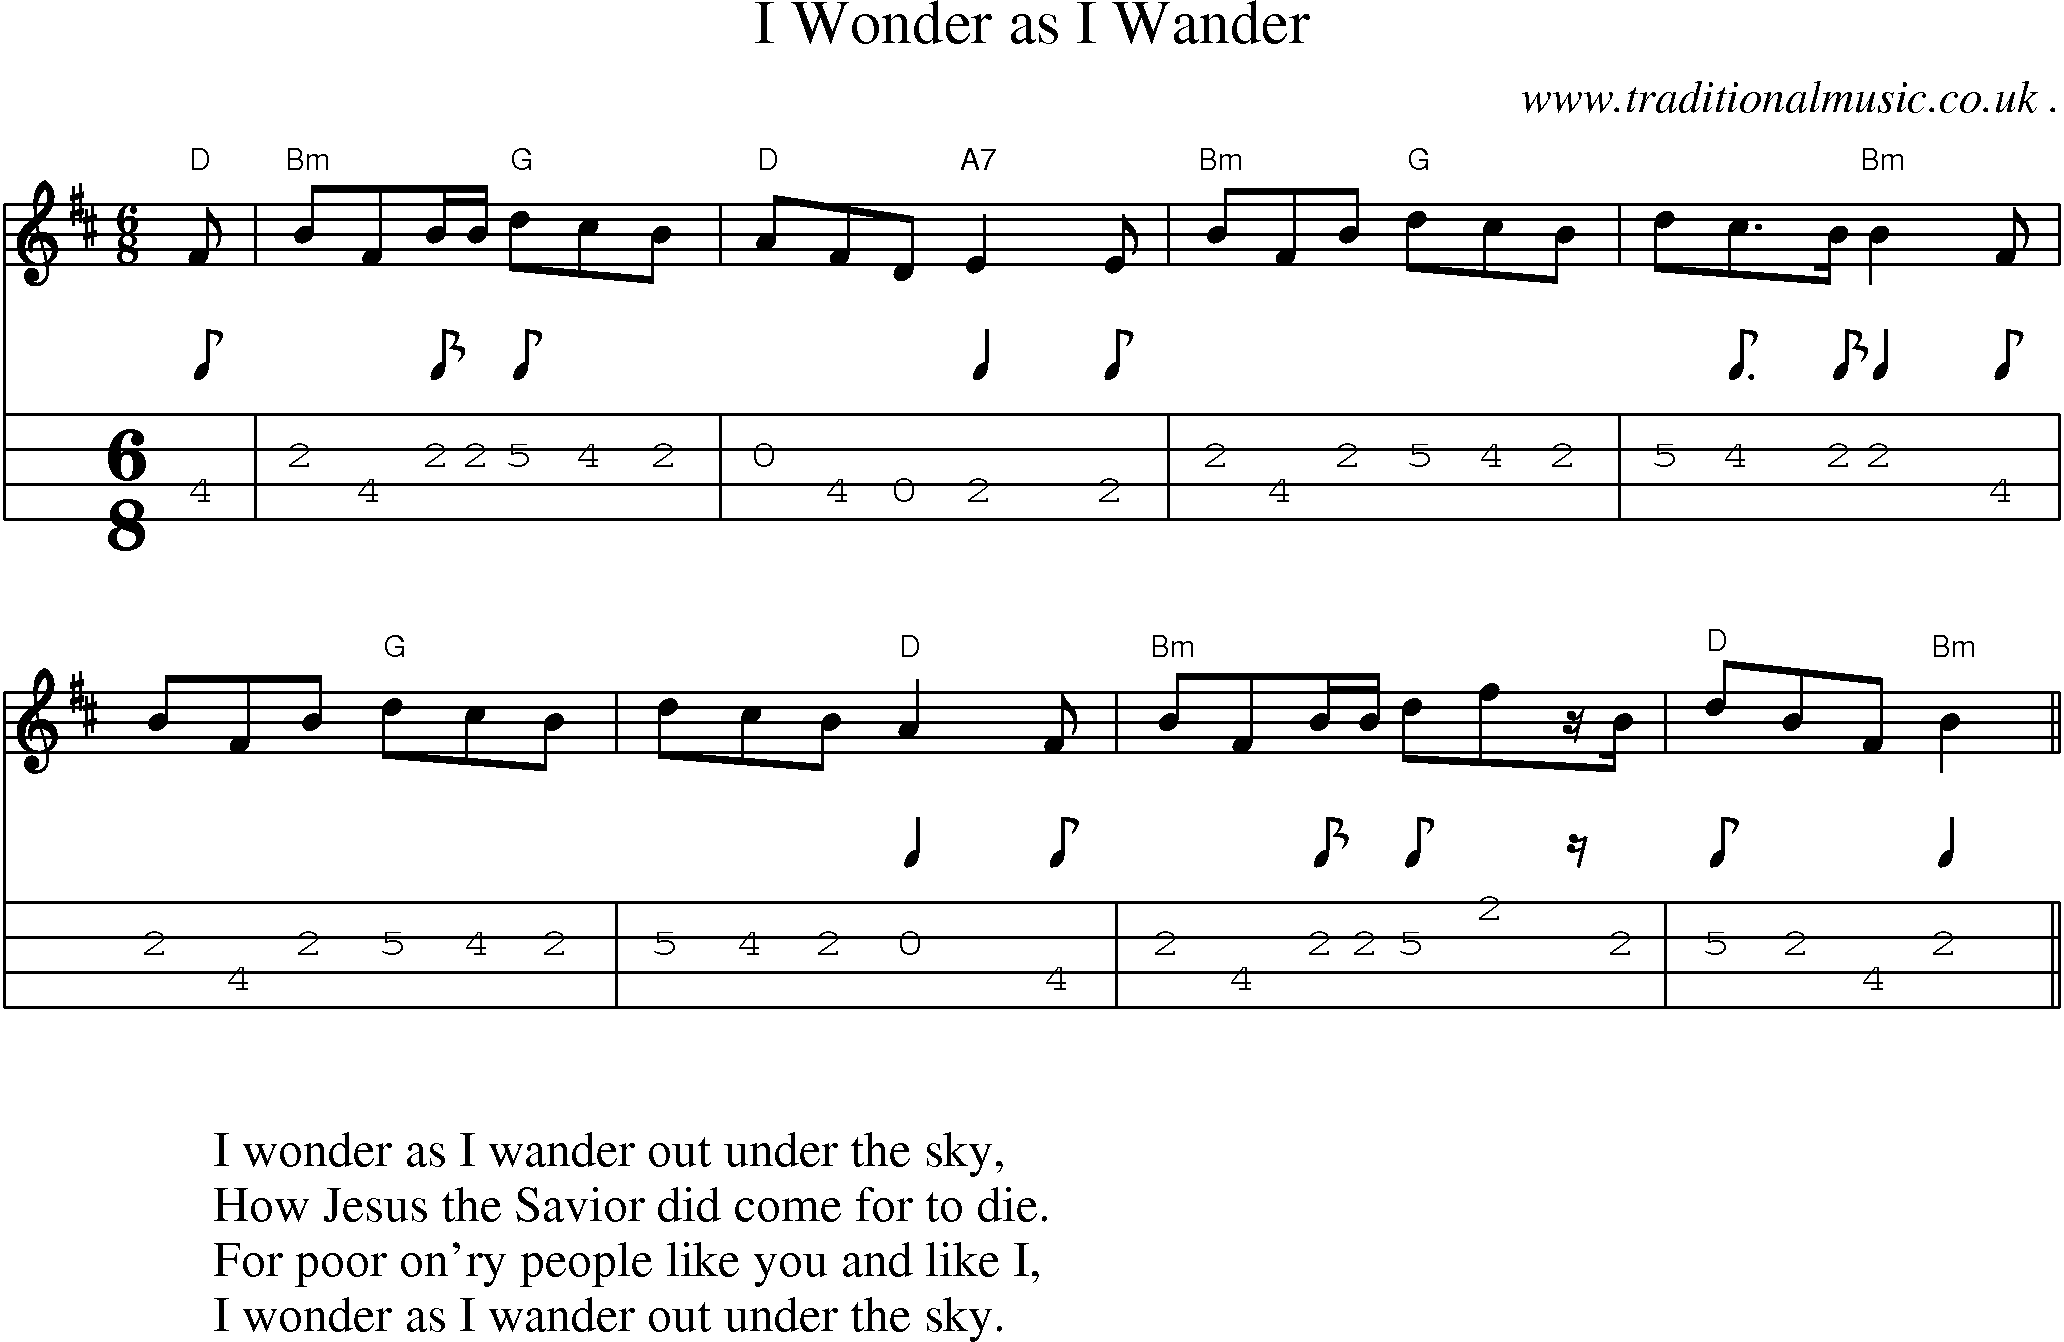 Music Score and Guitar Tabs for I Wonder as I Wander